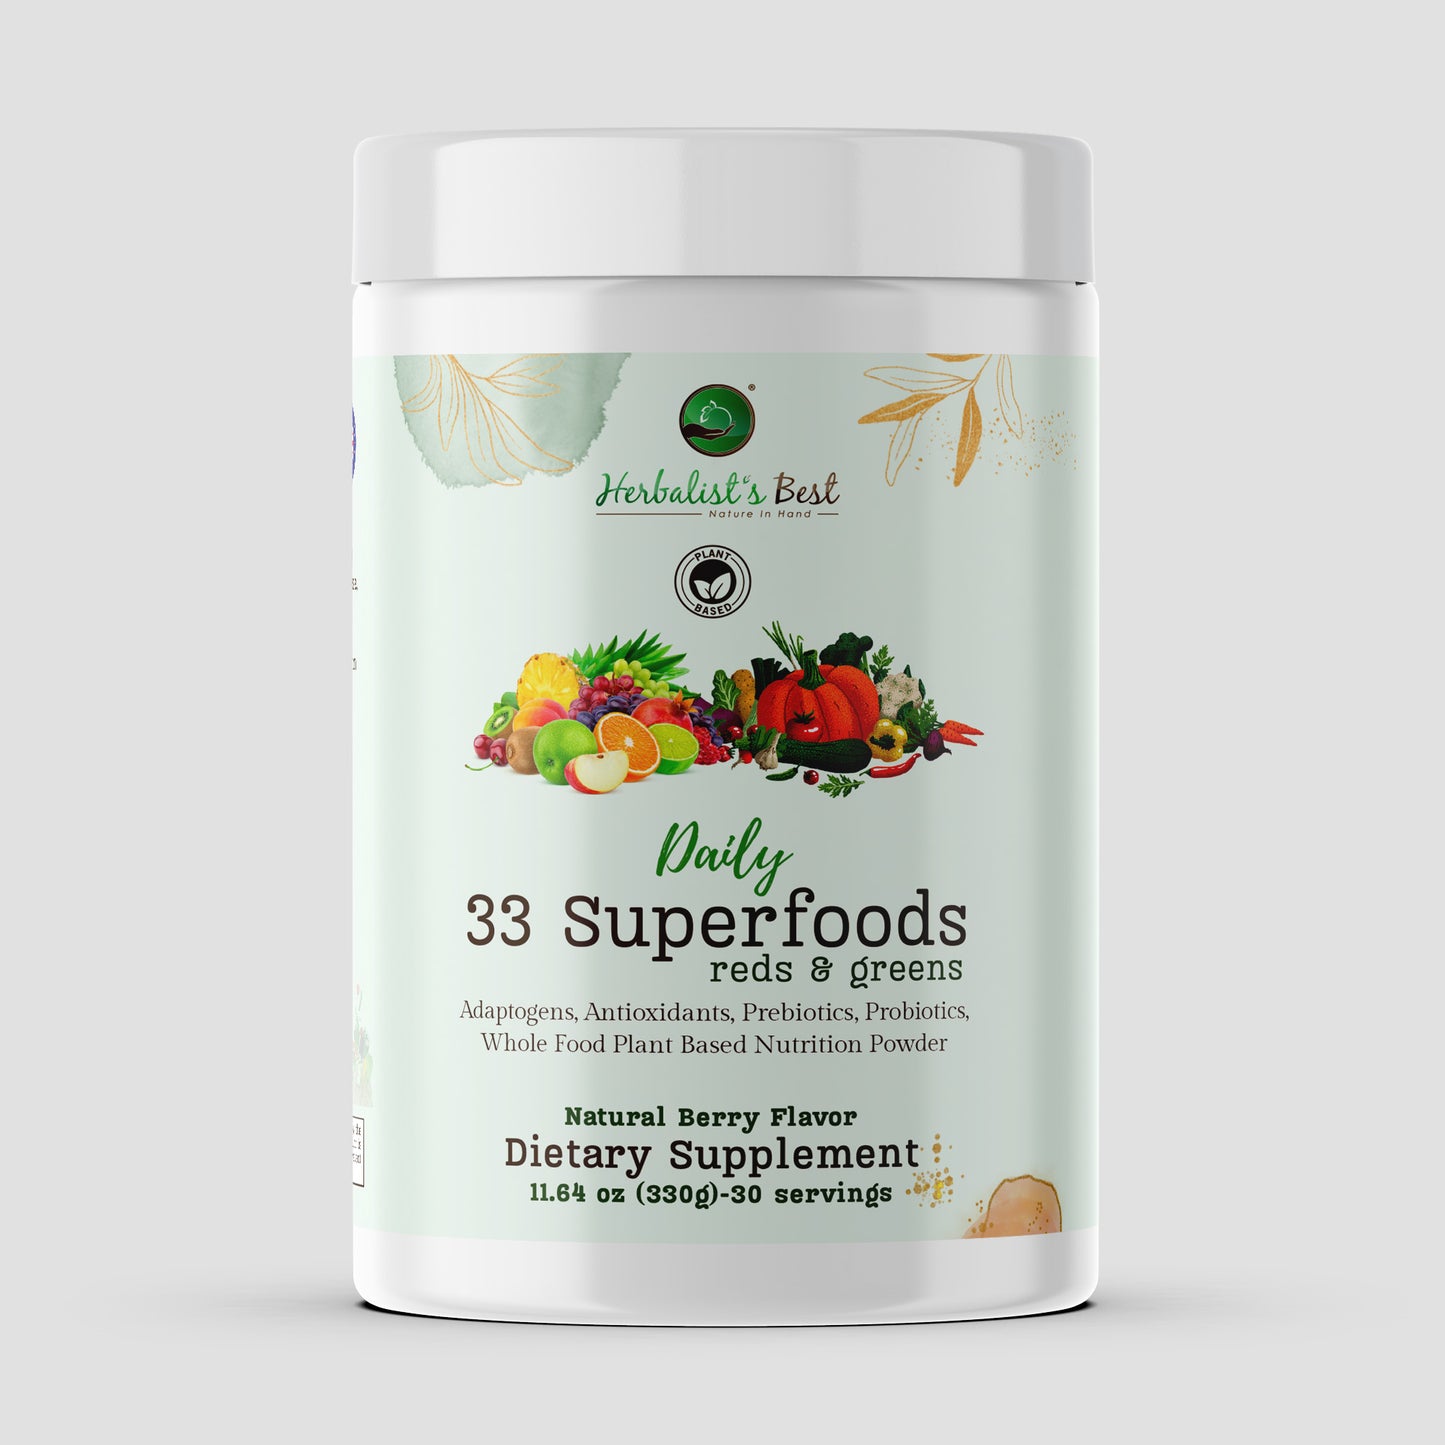 Daily 33 Superfoods Reds & Greens